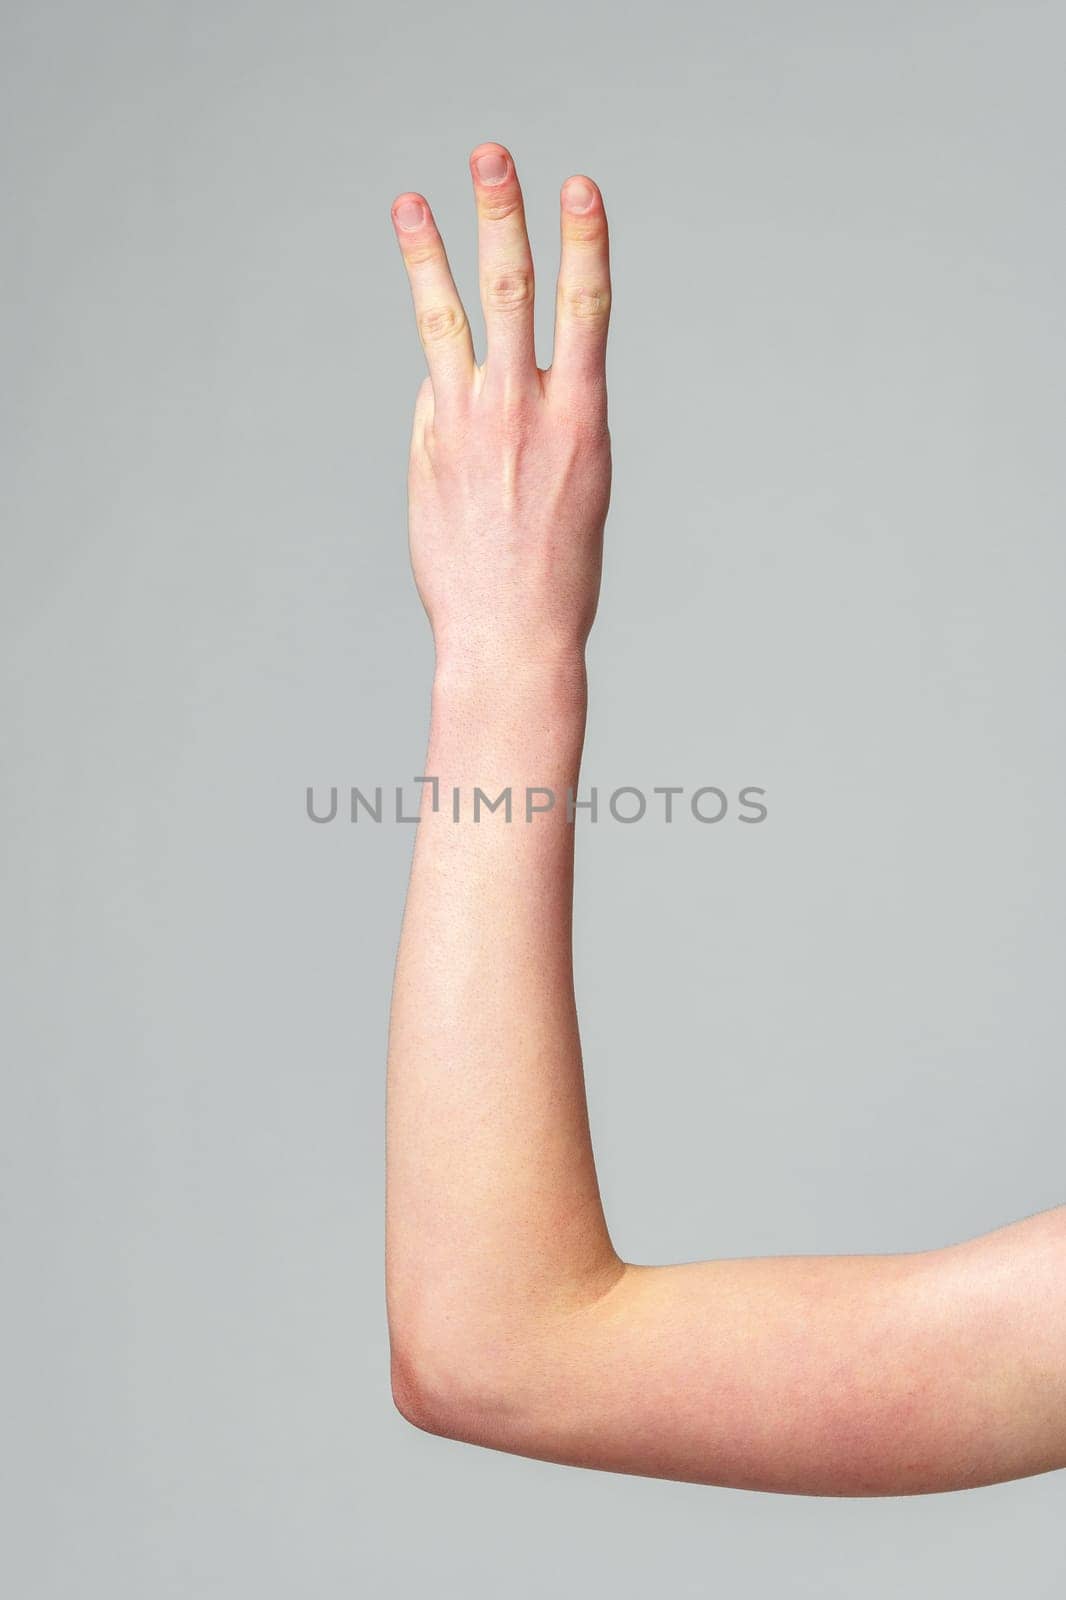 A human hand with fingers slightly apart is raised against a plain, neutral-colored background, signaling a nonverbal communication or waiting to be called upon.